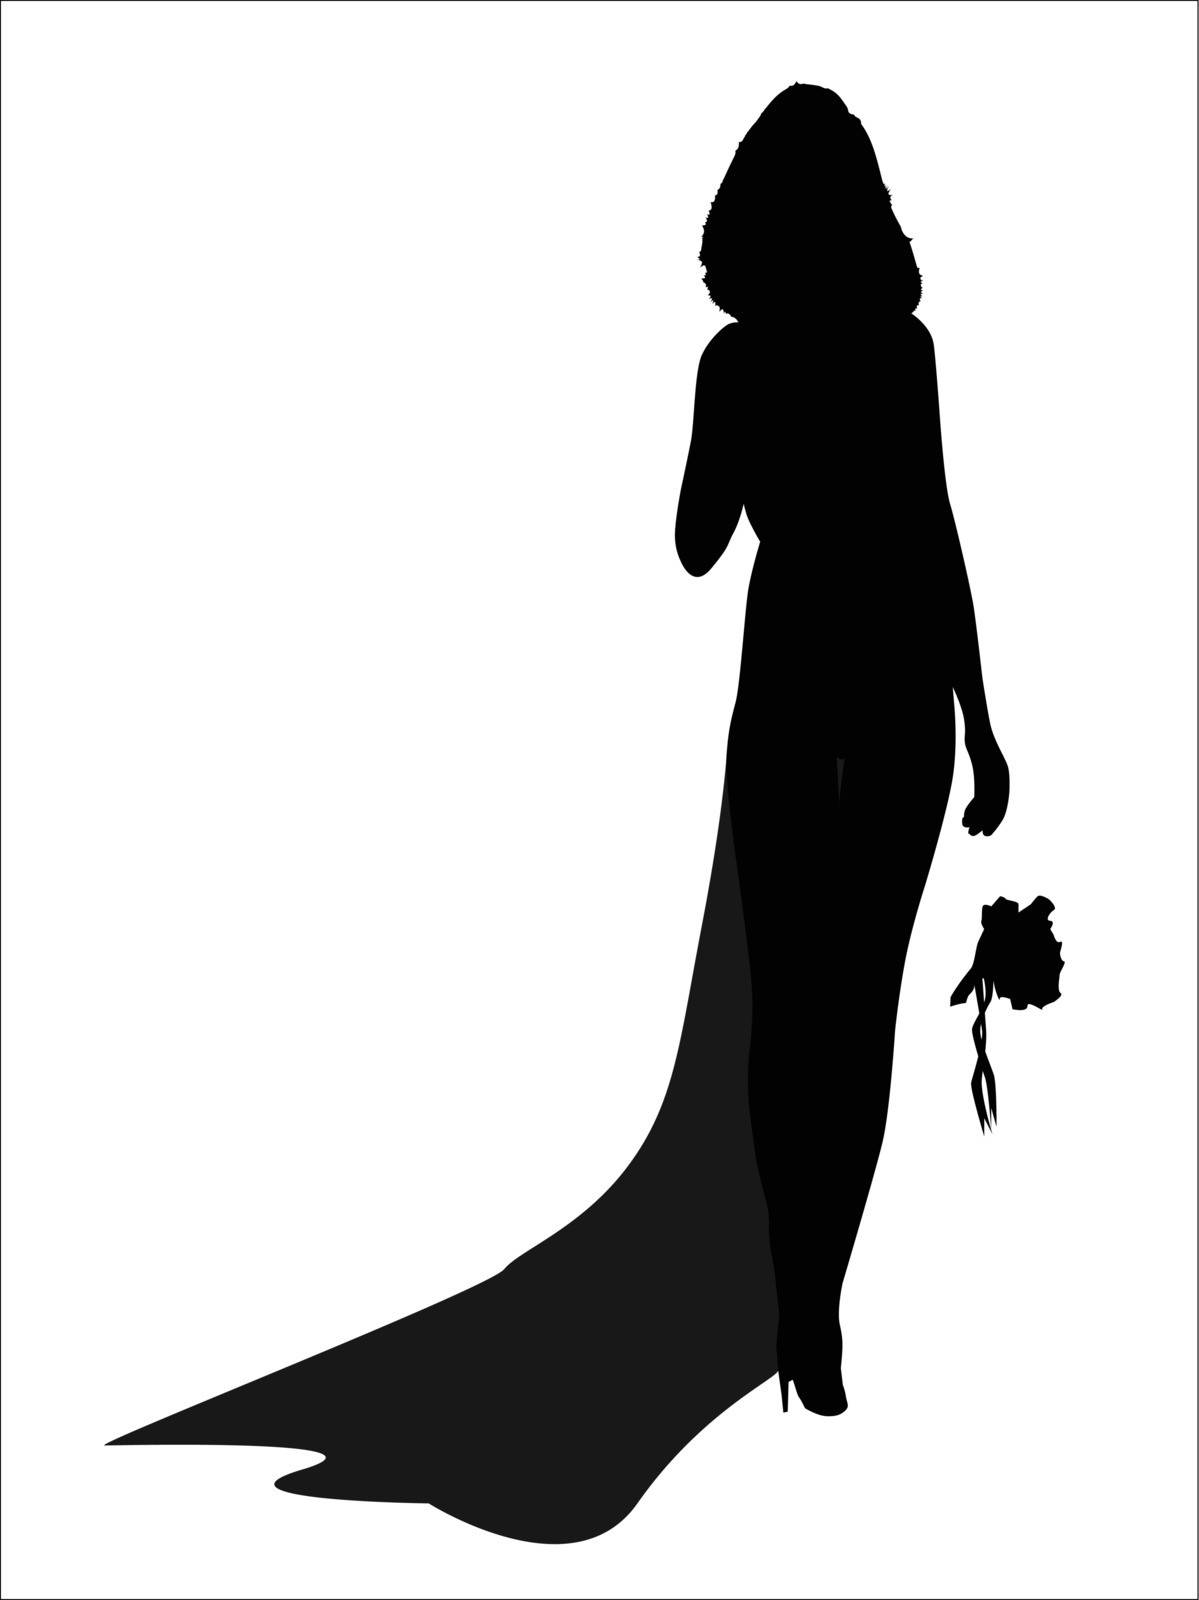 A sexy bride dropping her flowers as she walks away - jilted,